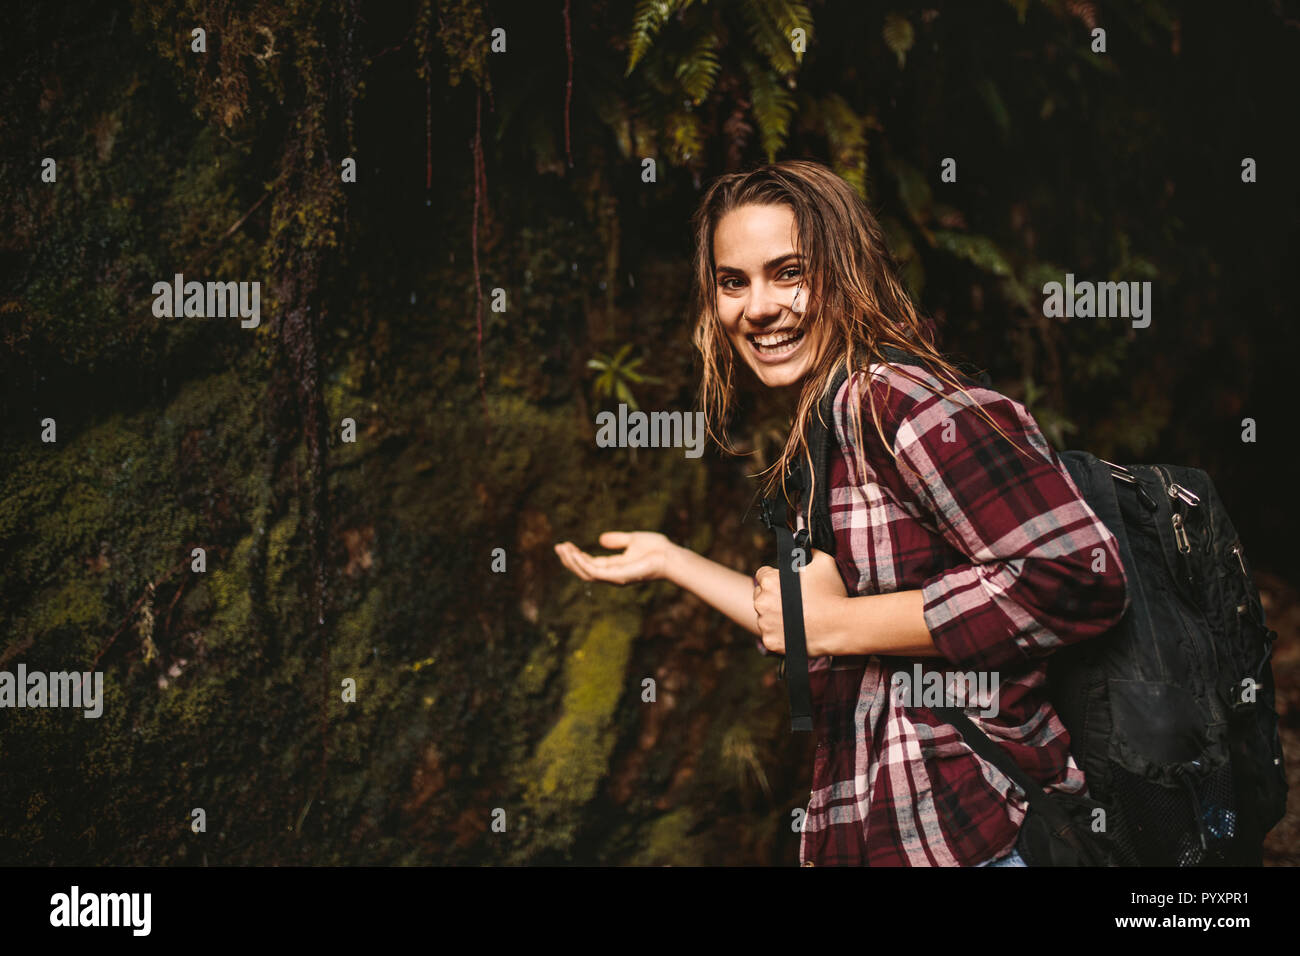 Portrait of beautiful young woman putting her hand under the water coming over from the rocks in forest. Cheerful woman enjoying a hike in rain forest Stock Photo